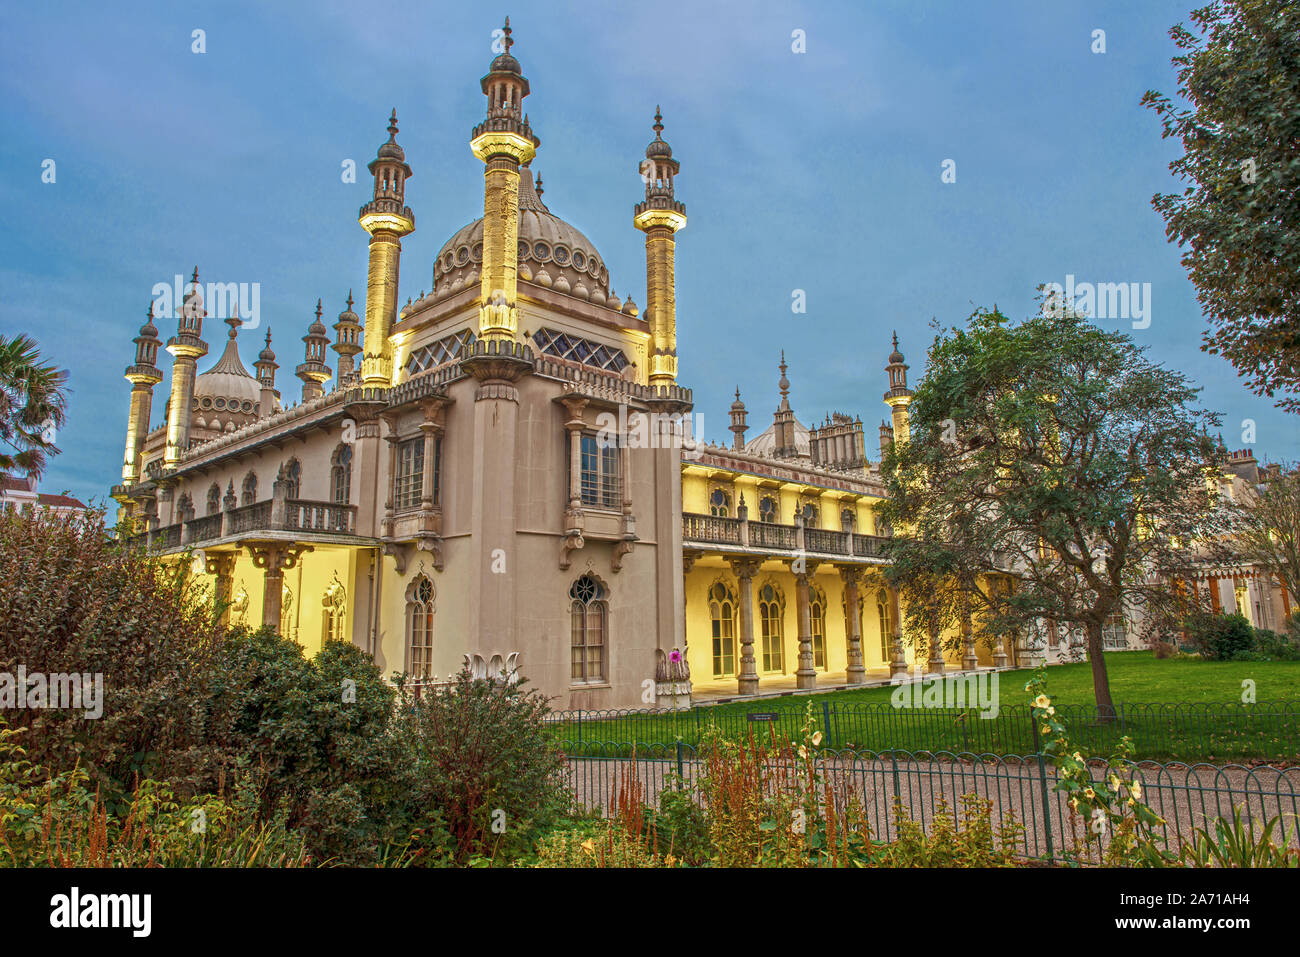 Royal Pavillion in Brighton, East Sussex, England. Stock Photo